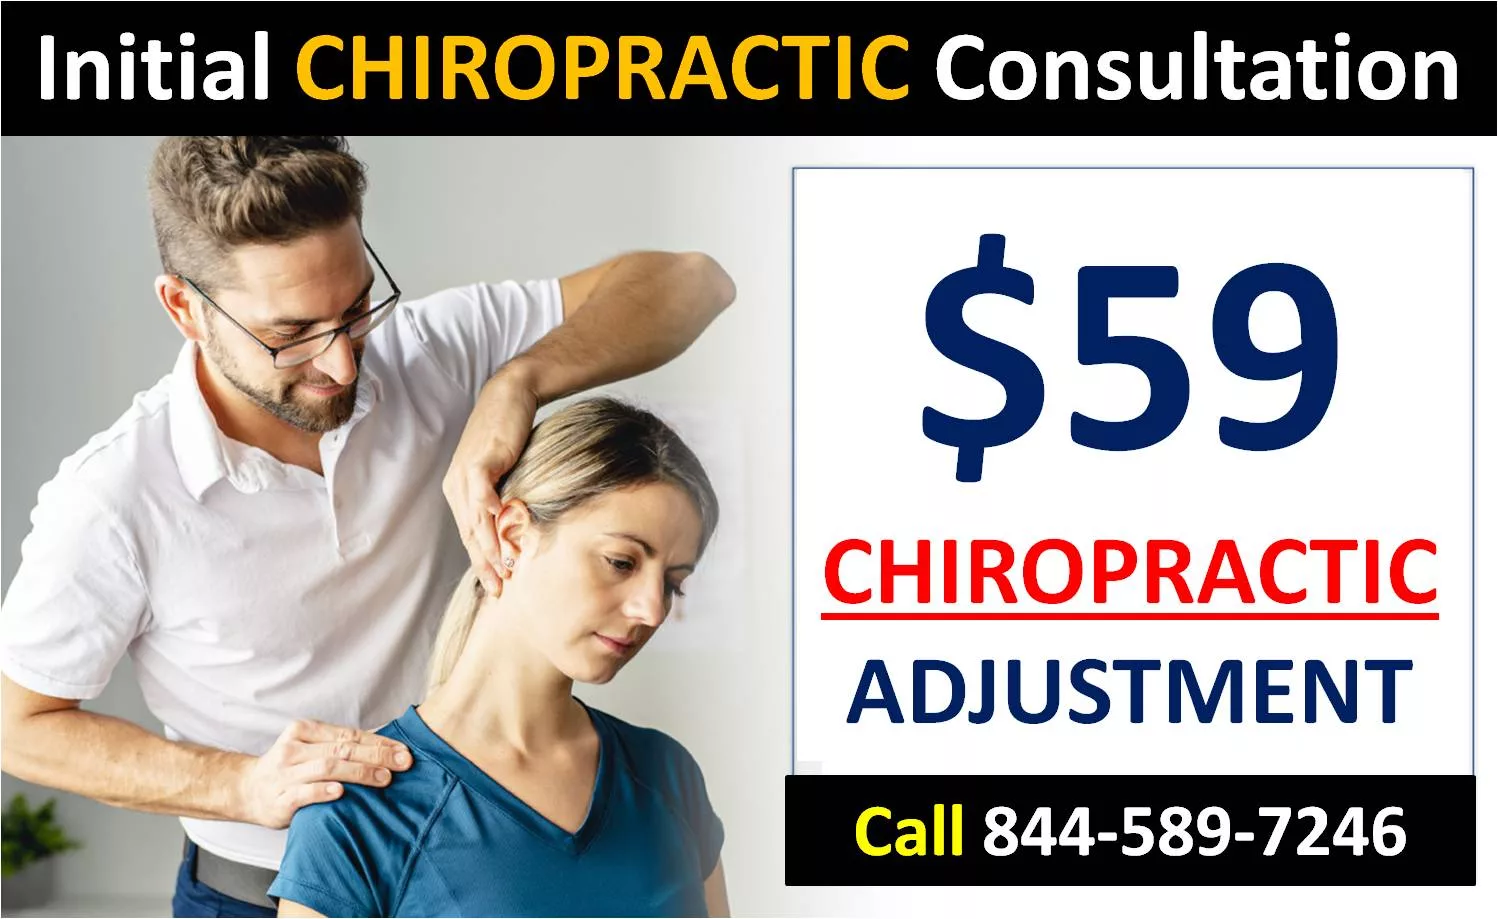 Longhorn Injury Chiropractic Adjustment $59 Offer in Dallas, TX